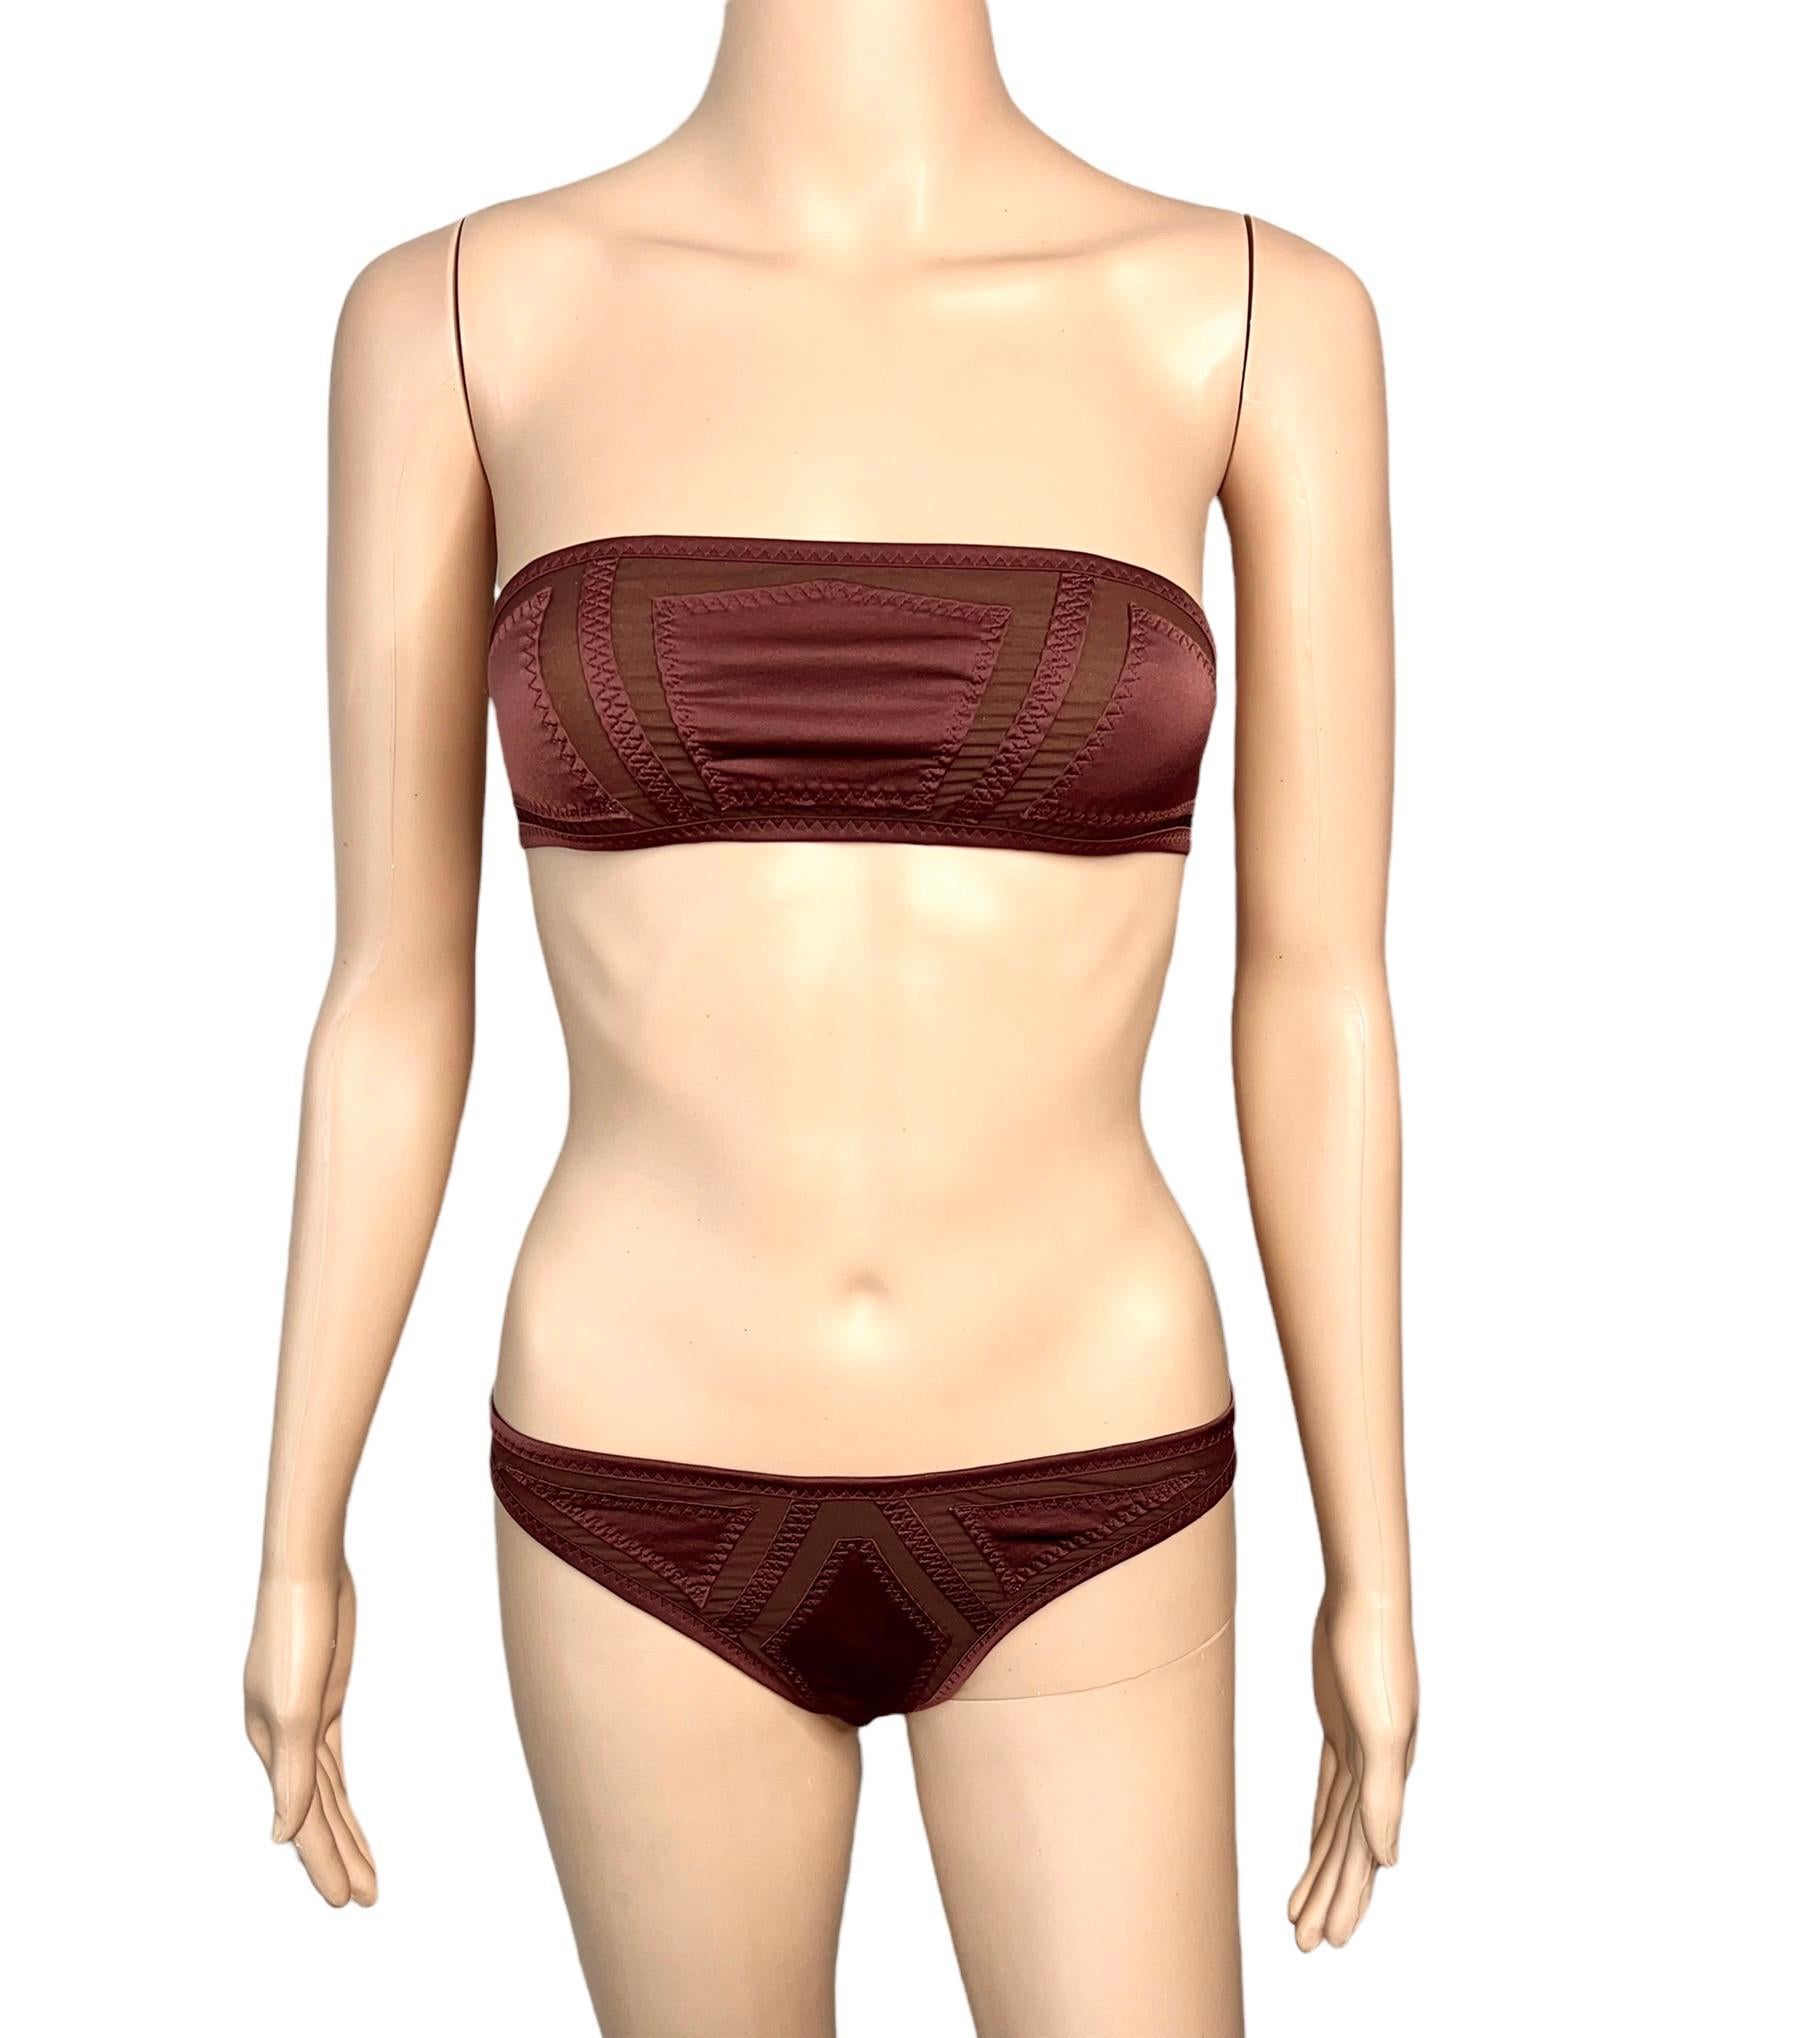 Gucci S/S 2005 Runway Cutout Sheer Panels Two-Piece Bikini Swimsuit Swimwear In Excellent Condition For Sale In Naples, FL